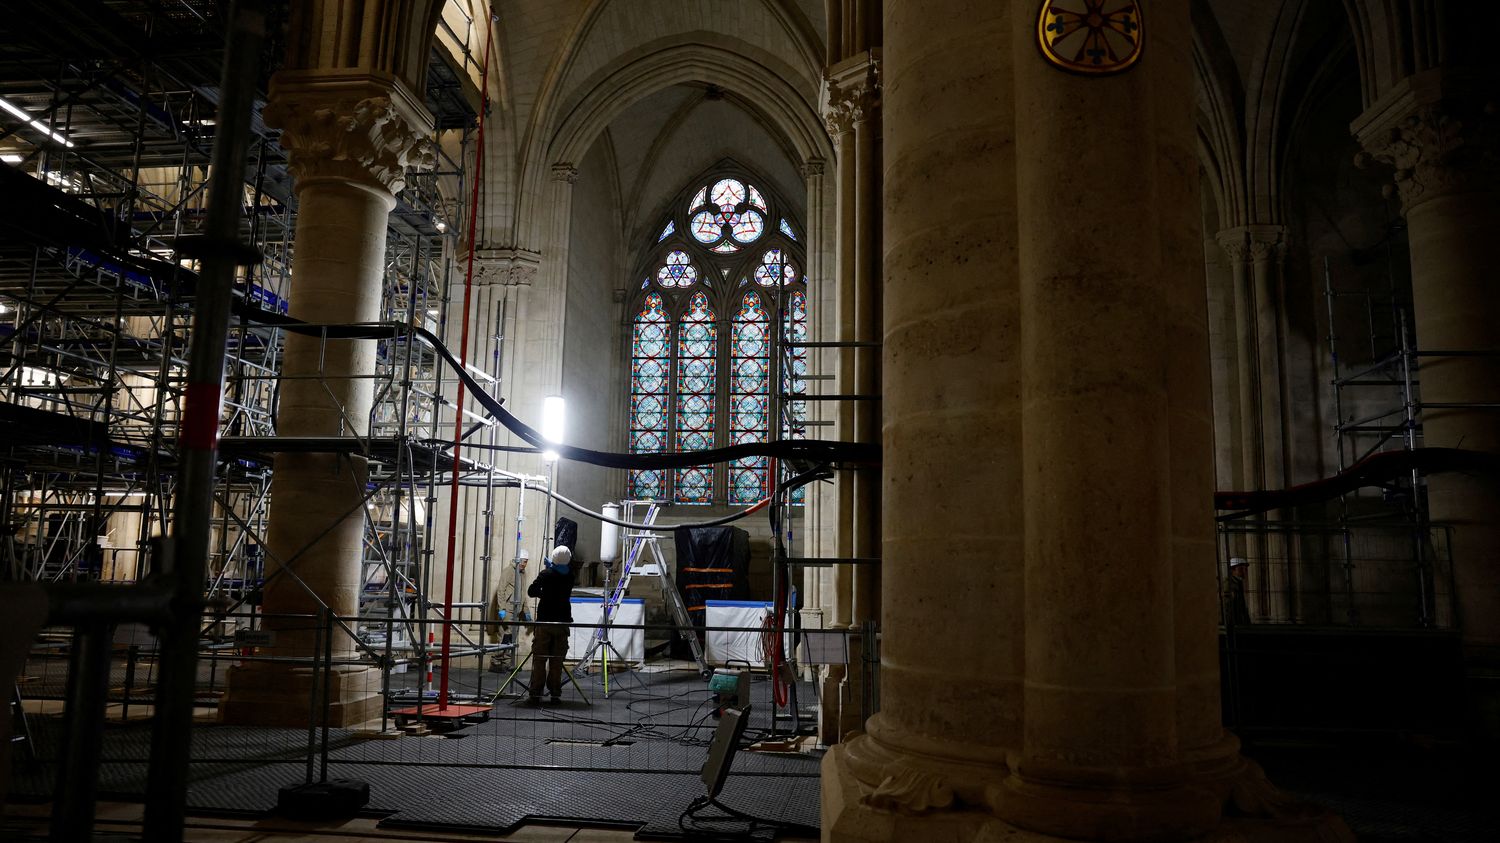 Reconstruction of Notre-Dame de Paris: from cellars to tower, how the site helped reveal the cathedral's secrets and advance scientific knowledge